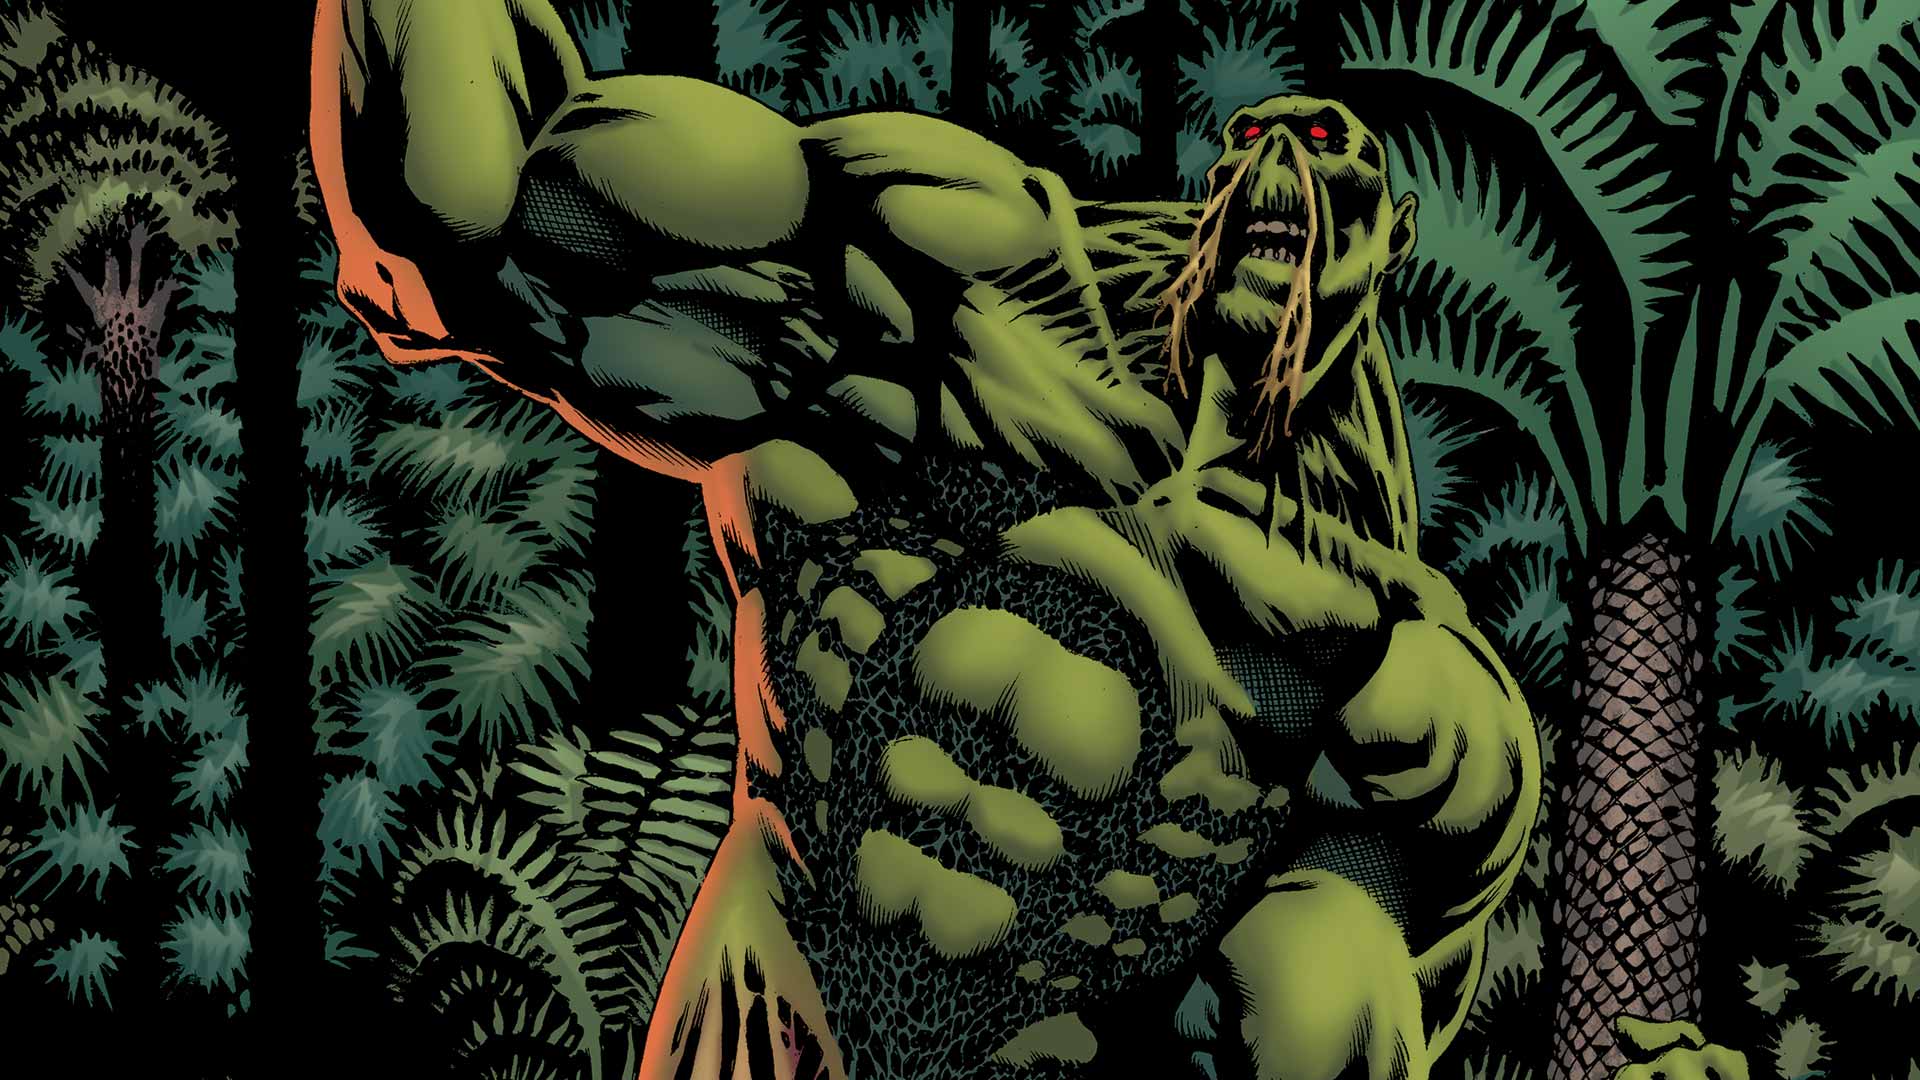 DC Universe’s Swamp Thing To Lean Into Gothic Horror/Romance According To James Wan